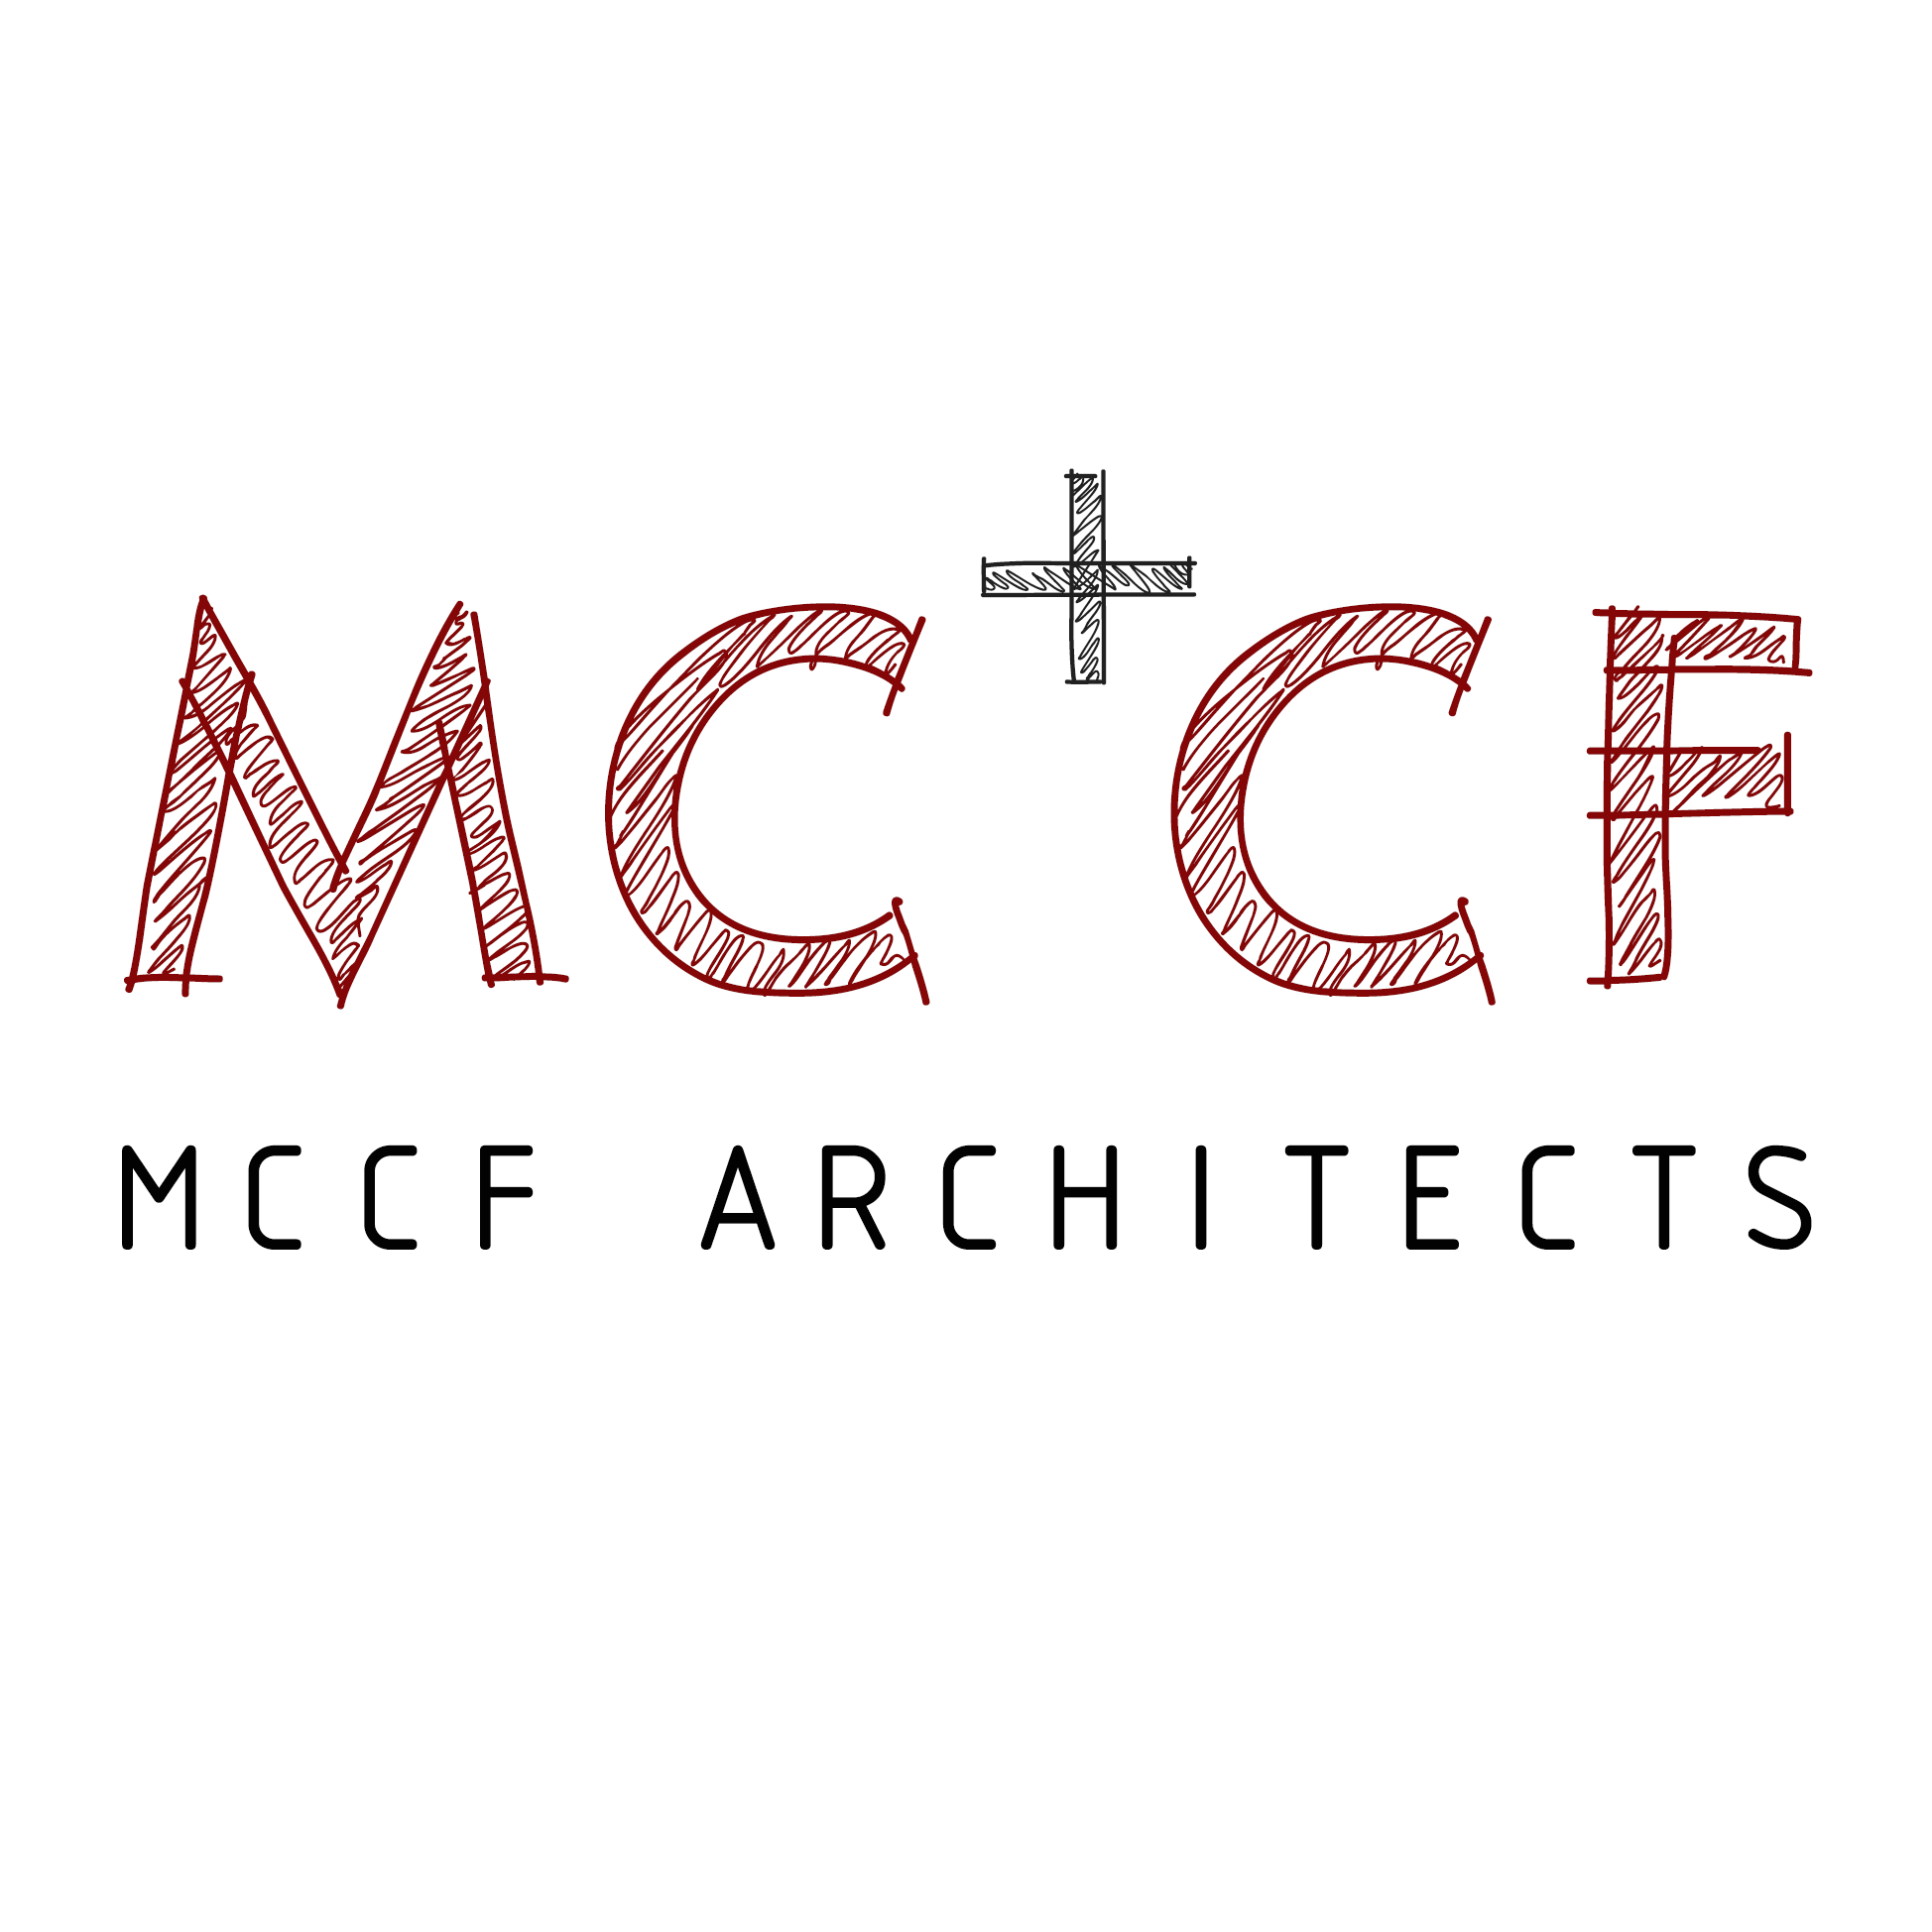 MCCF Architects|Legal Services|Professional Services